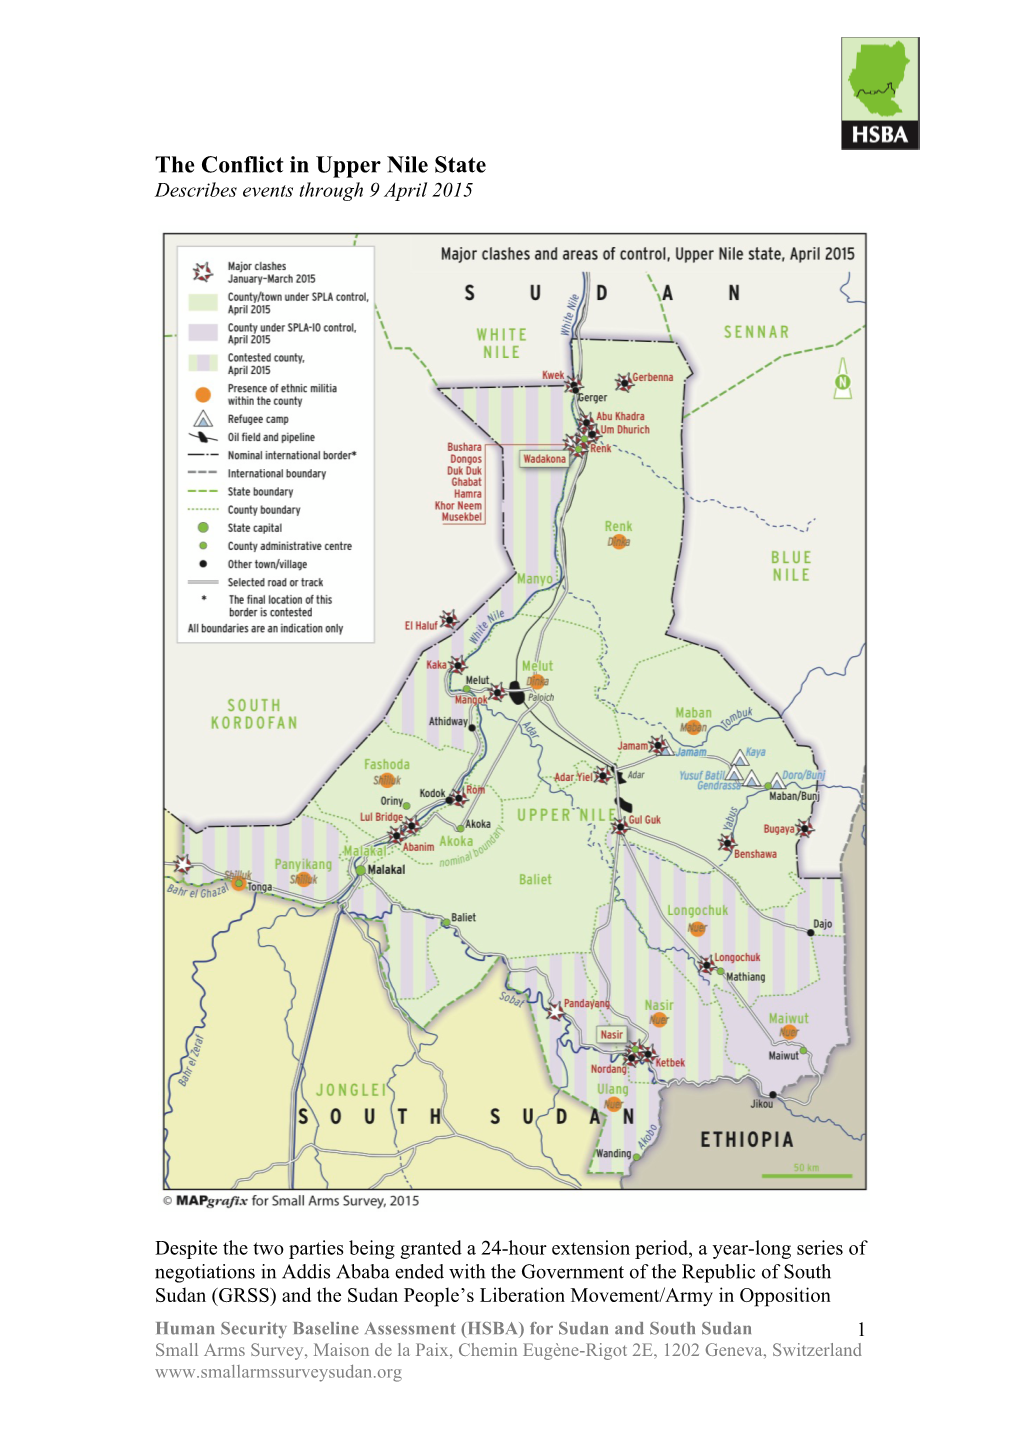 The Conflict in Upper Nile State Describes Events Through 9 April 2015